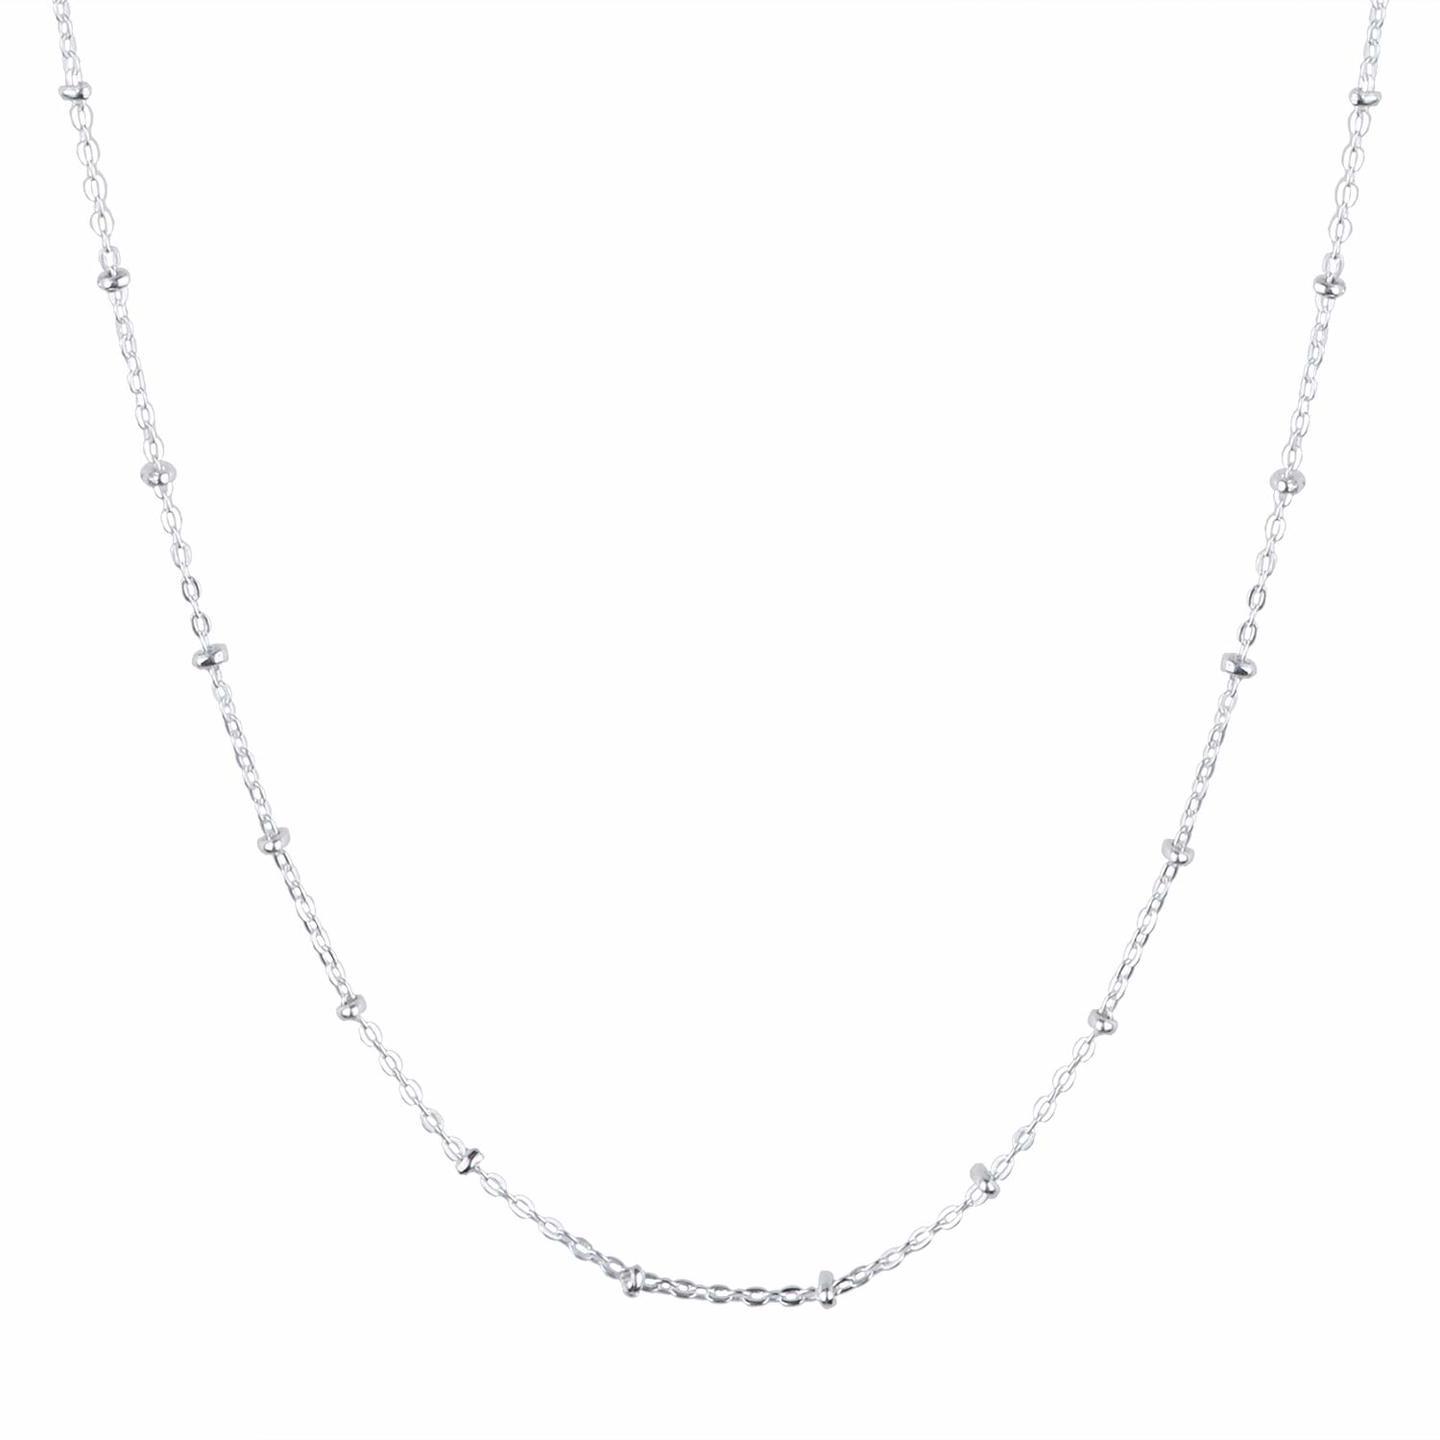 Nemichand Jewels Sterling Silver 925 Thin Chain for Women & Men SS-1